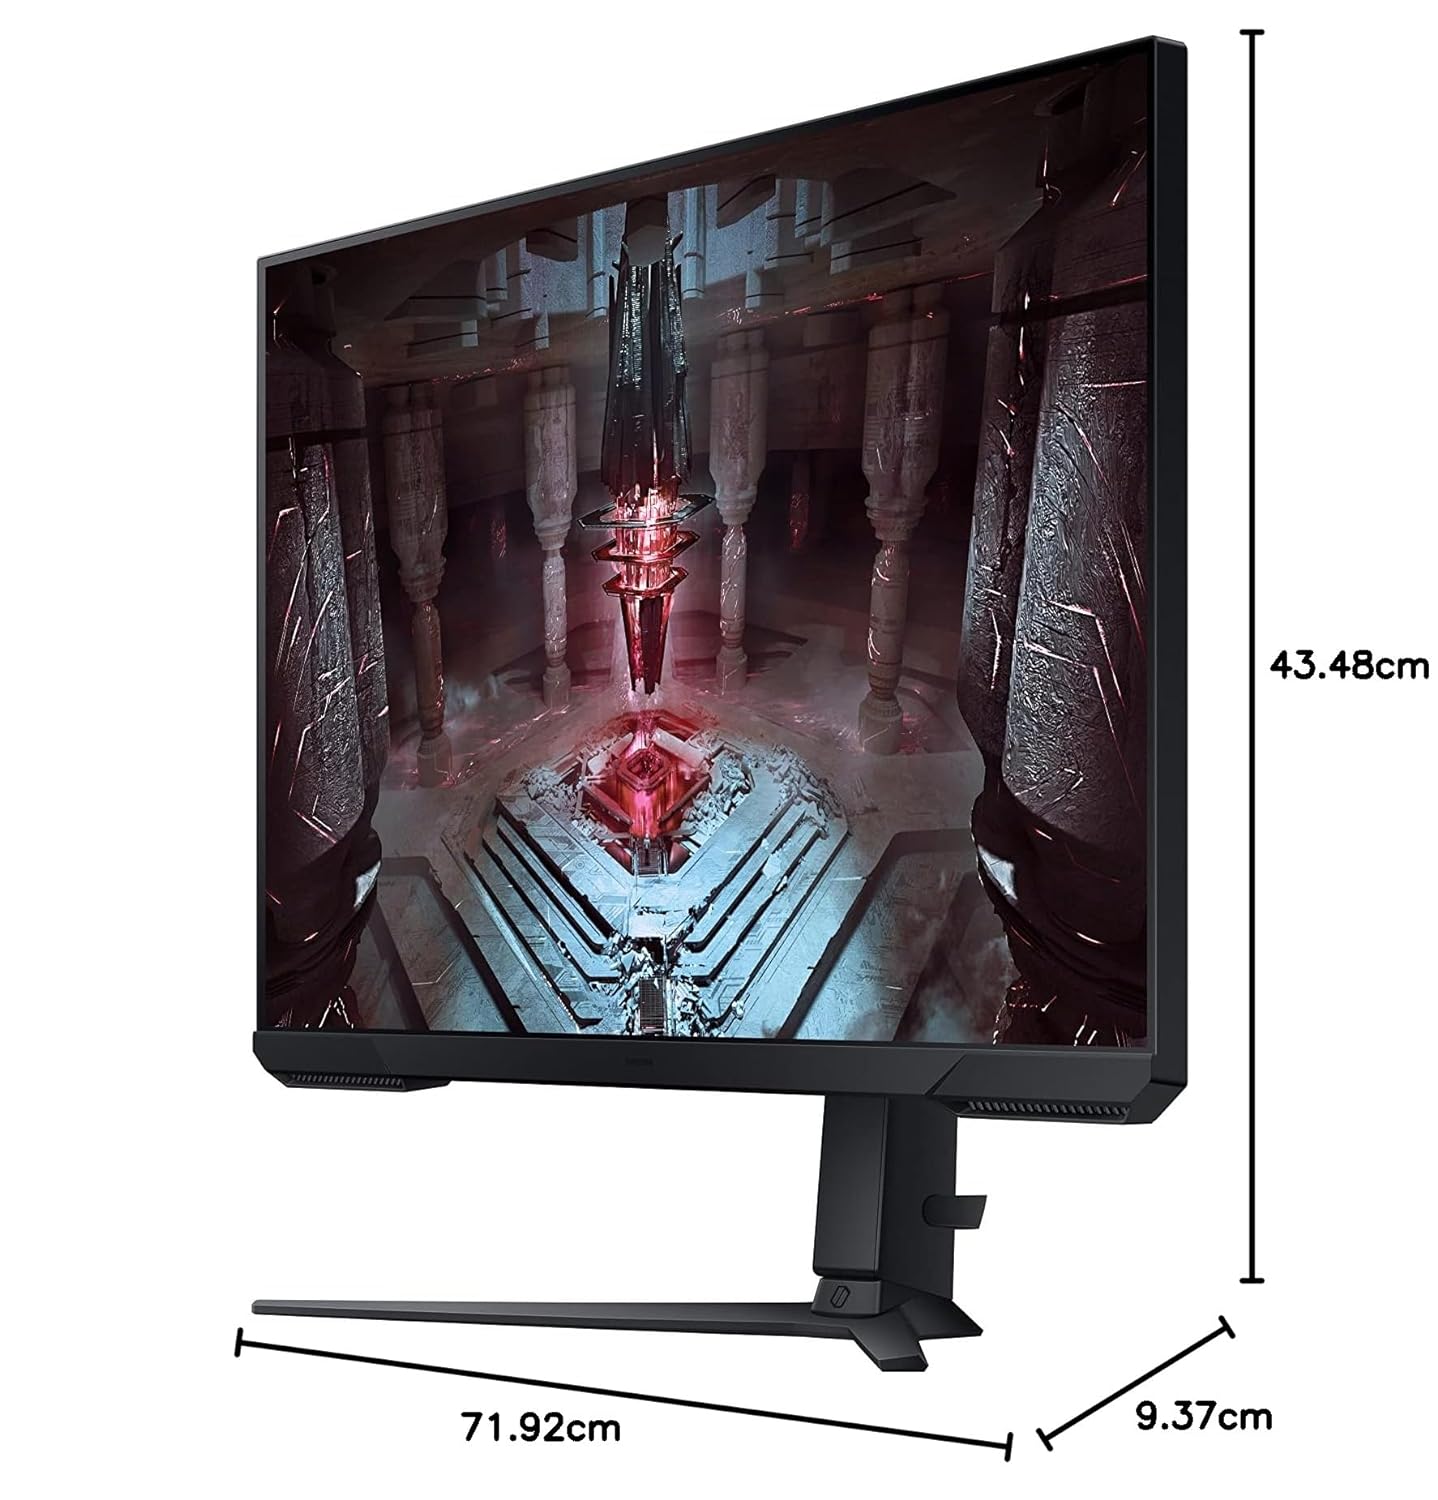 Samsung 32-Inch (80Cm) 2K QHD Odyssey G5 Flat Gaming Monitor , 165Hz, Response Time 1Ms (GTG) , Flat LCD Monitor, 2560 X 1440 Pixels, Height Adjustable Stand, HDR10, AMD Freesync  Flat Gaming Monitor 32-Inch 1Ms 2K QHD